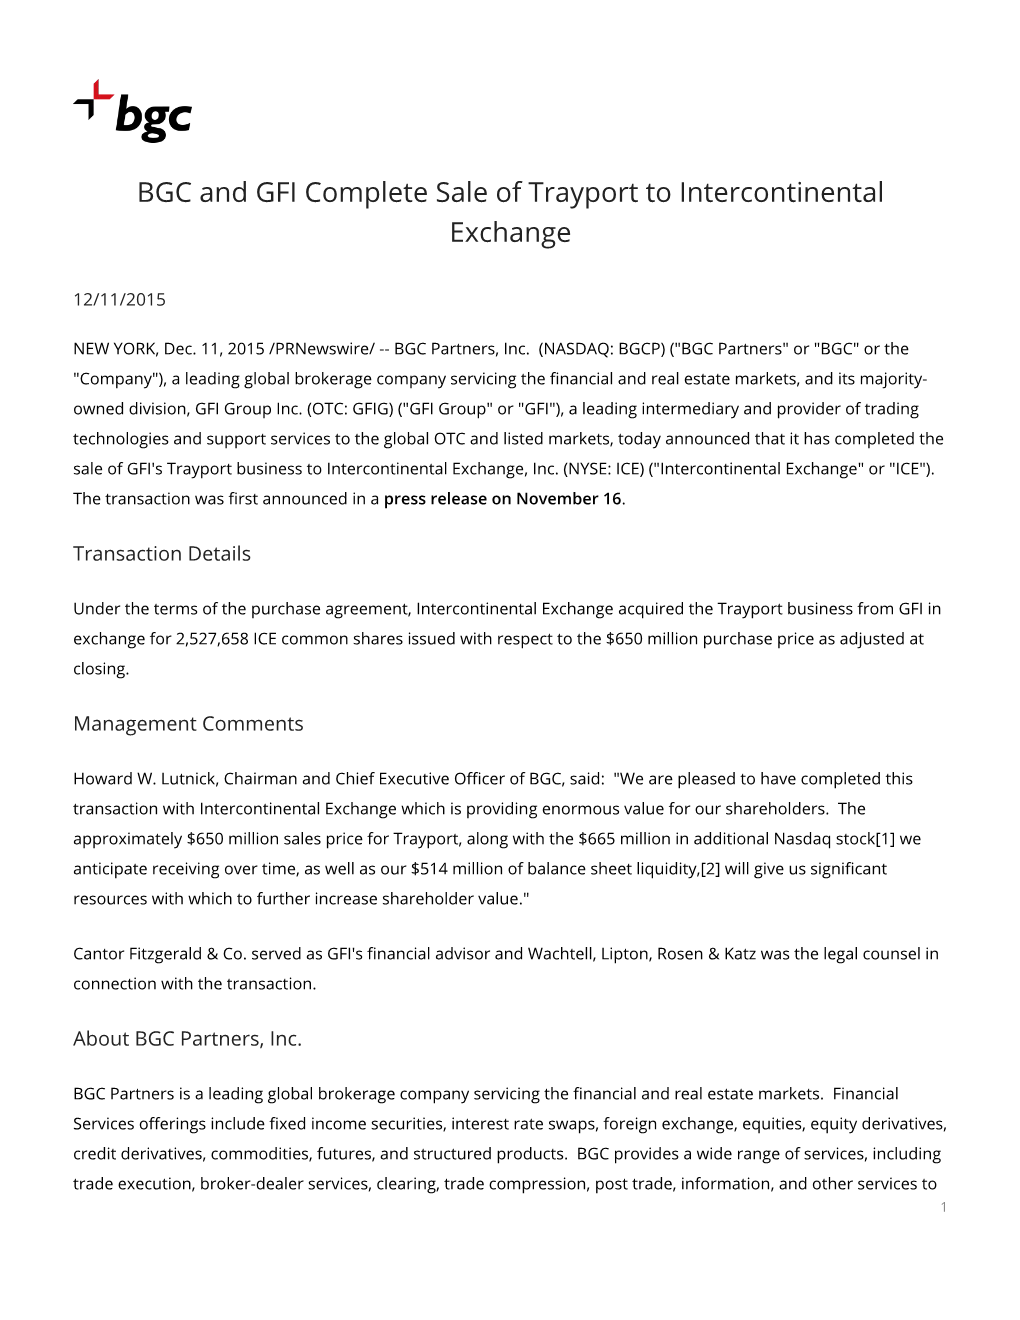 BGC and GFI Complete Sale of Trayport to Intercontinental Exchange